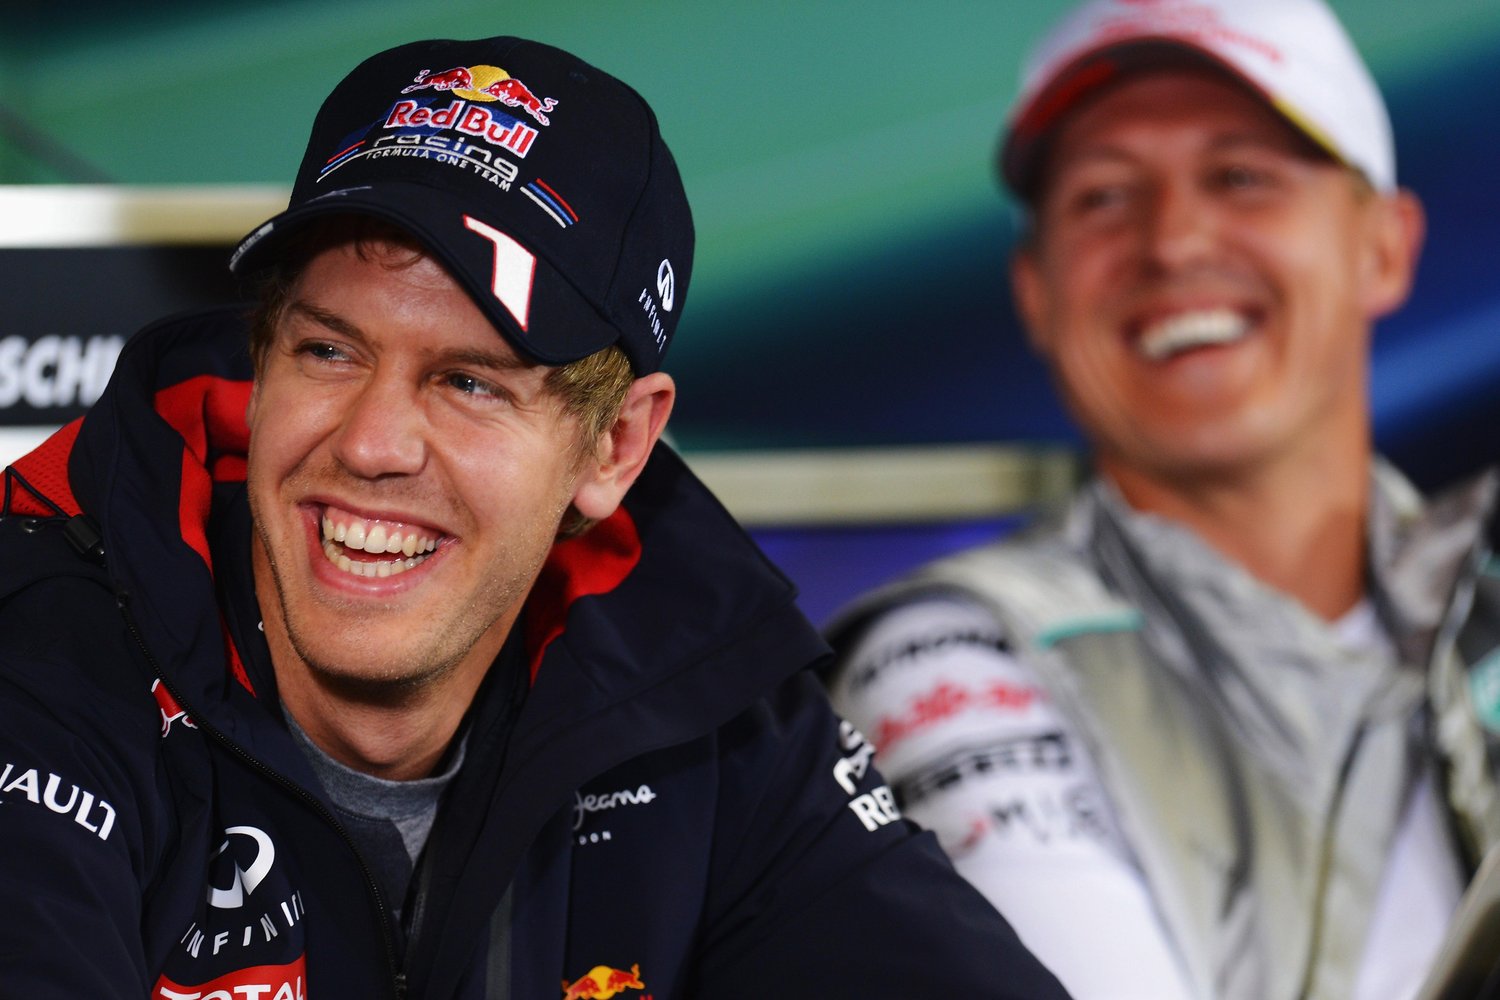 HOCKENHEIM, GERMANY - JULY 19:  (L-R) Sebastian Vettel of Germany and Red Bull Racing and Michael Schumacher of Germany and Mercedes GP attend the drivers press conference during previews to the German Grand Prix at Hockenheimring on July 19, 2012 in Hockenheim, Germany.  (Photo by Lars Baron/Getty Images) *** Local Caption *** Sebastian Vettel; Michael Schumacher